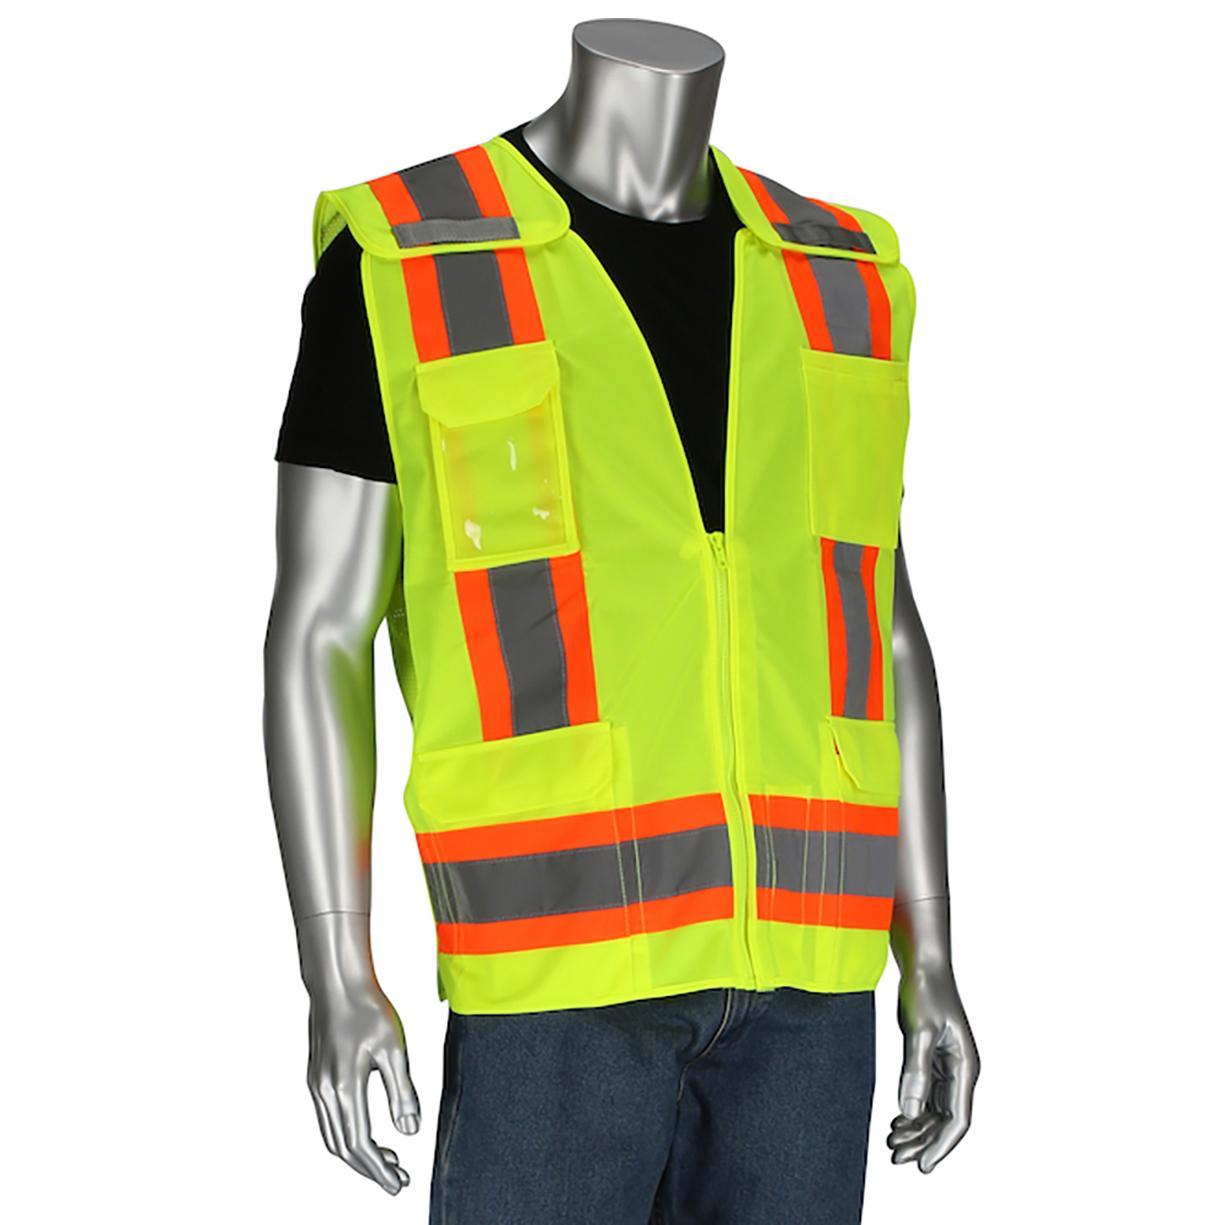 PIP 302-0505 Type R Class Mesh Breakaway Surveyors Safety Vest Yellow/ Lime Full Source